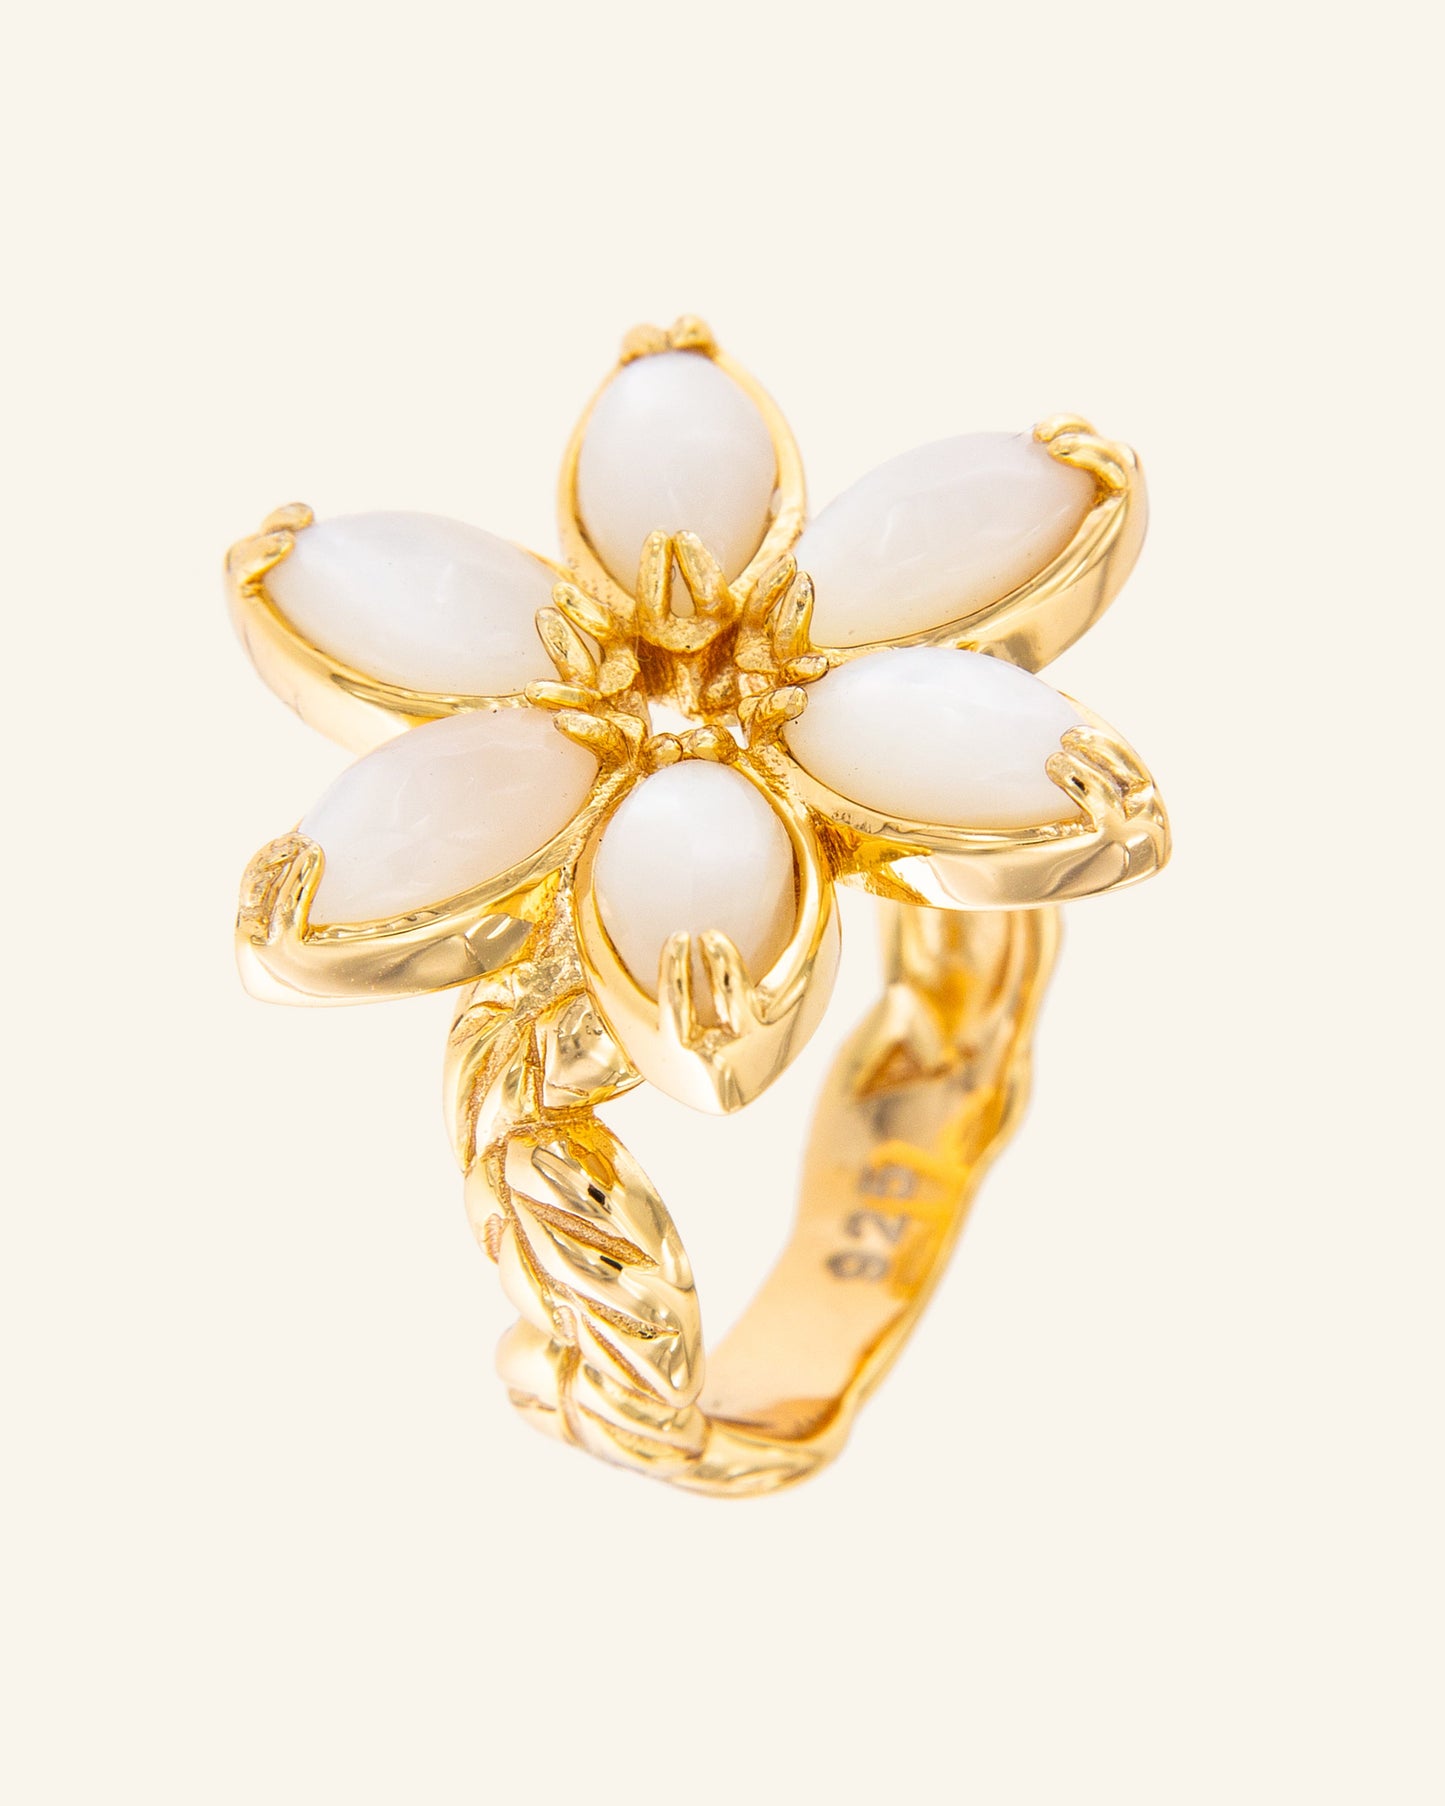 Jasmine ring with white mother-of-pearl